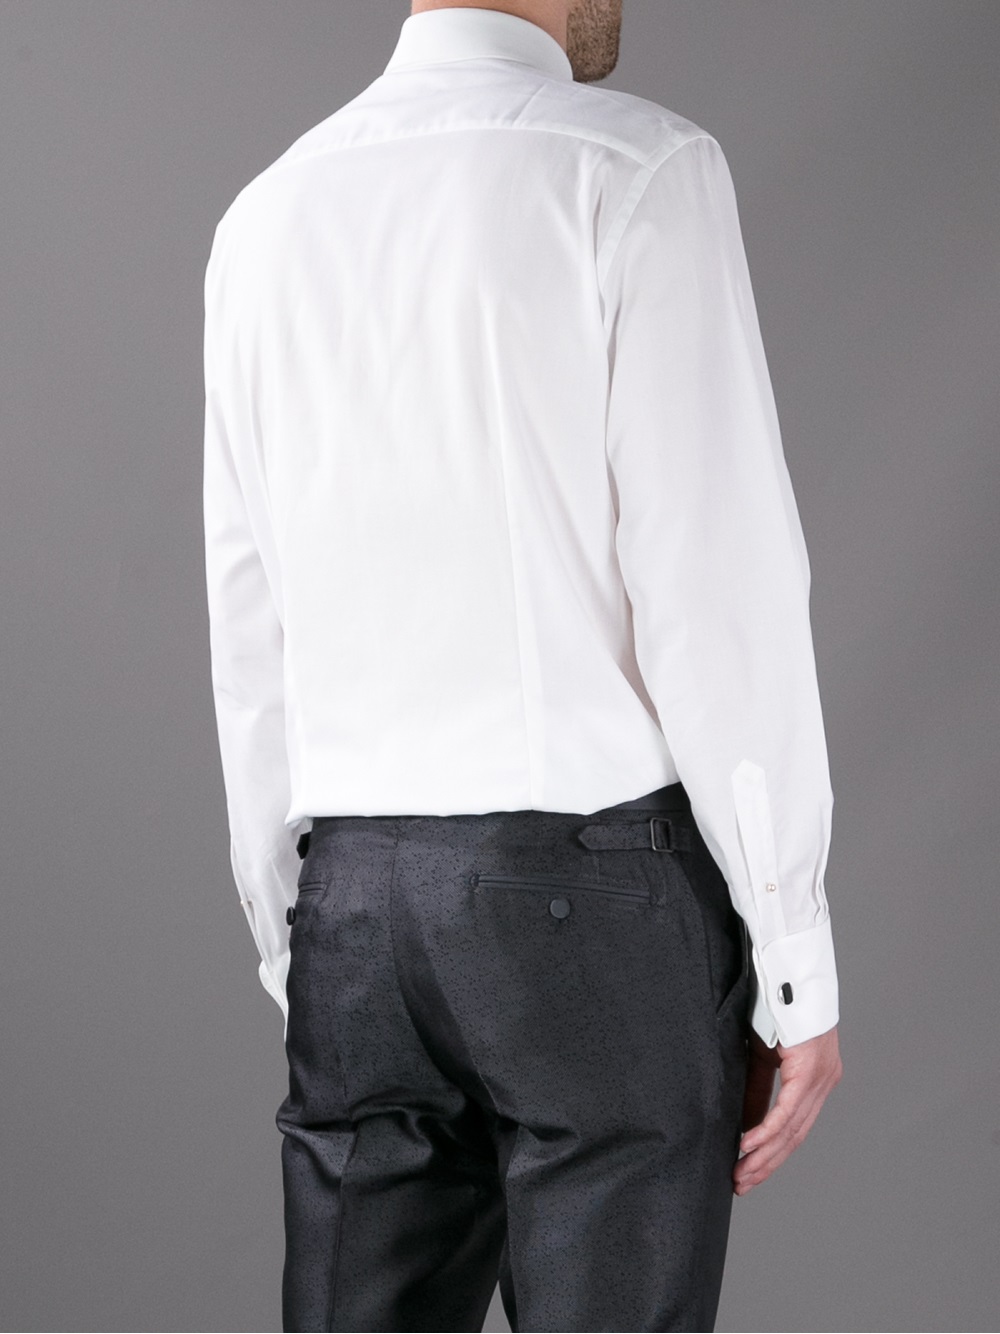 Lanvin Faux Pearl Button Shirt in White for Men - Lyst